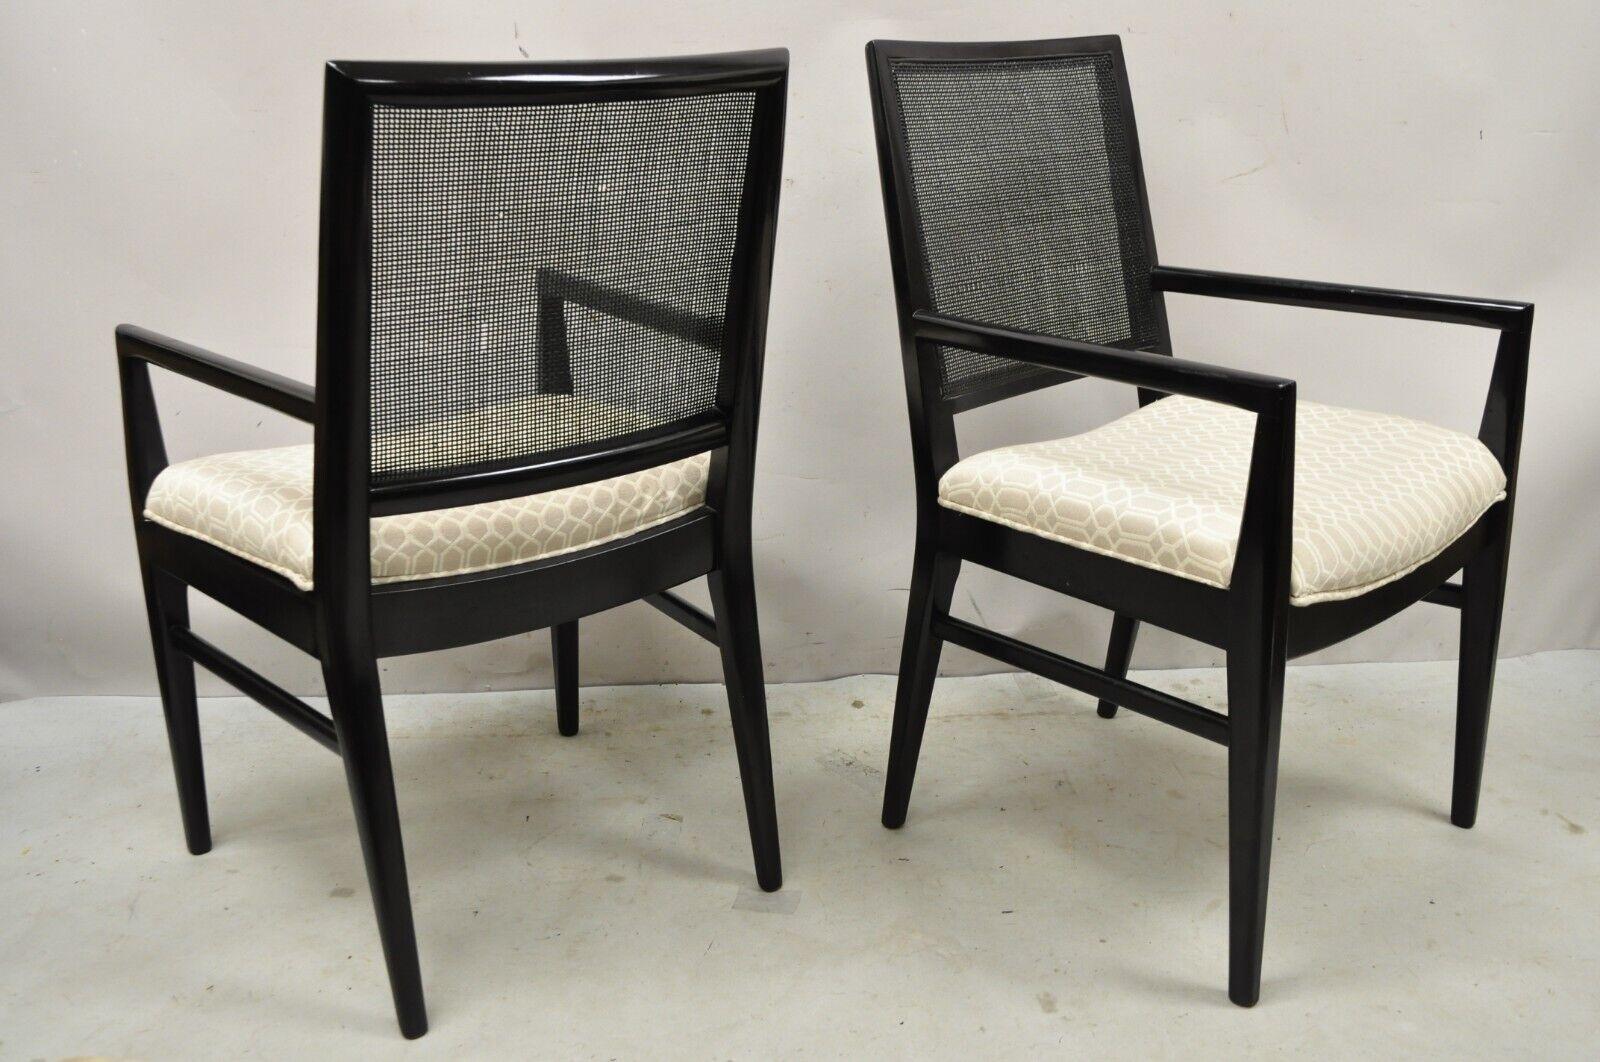 Vintage Mid Century Modern Paul McCobb Style Black Cane Dining Chairs - Set of 6. Item features solid wood frames, black ebonized finish, cane backs, sleek sculptural finish. Maker unconfirmed but style very similar to Paul McCobb. Set includes 4